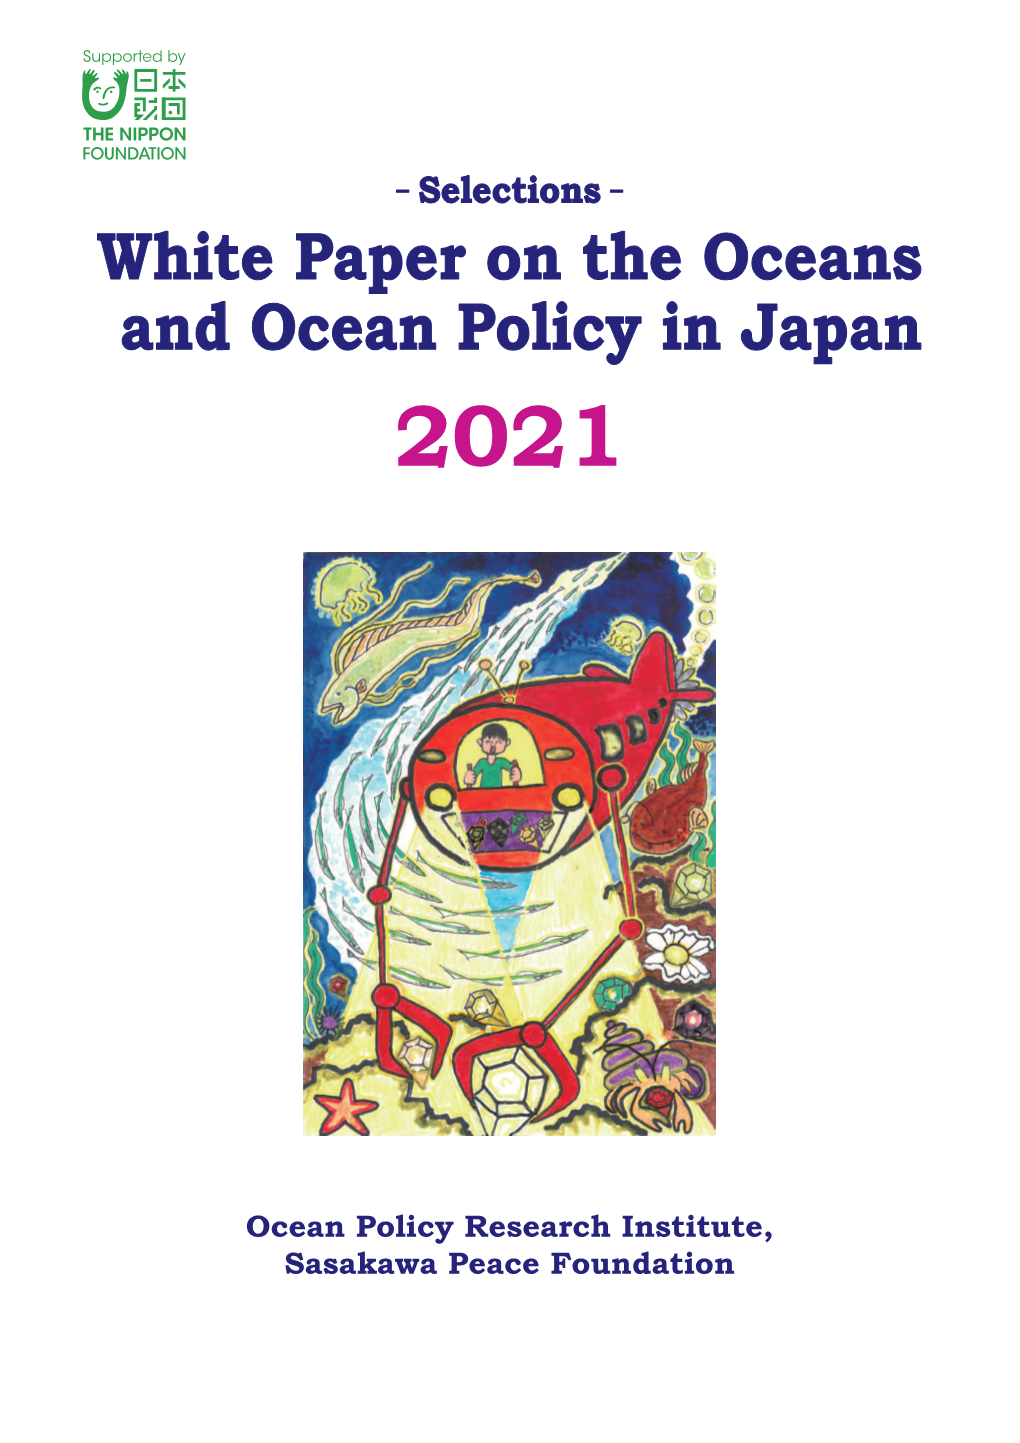 White Paper on the Oceans and Ocean Policy in Japan 2021